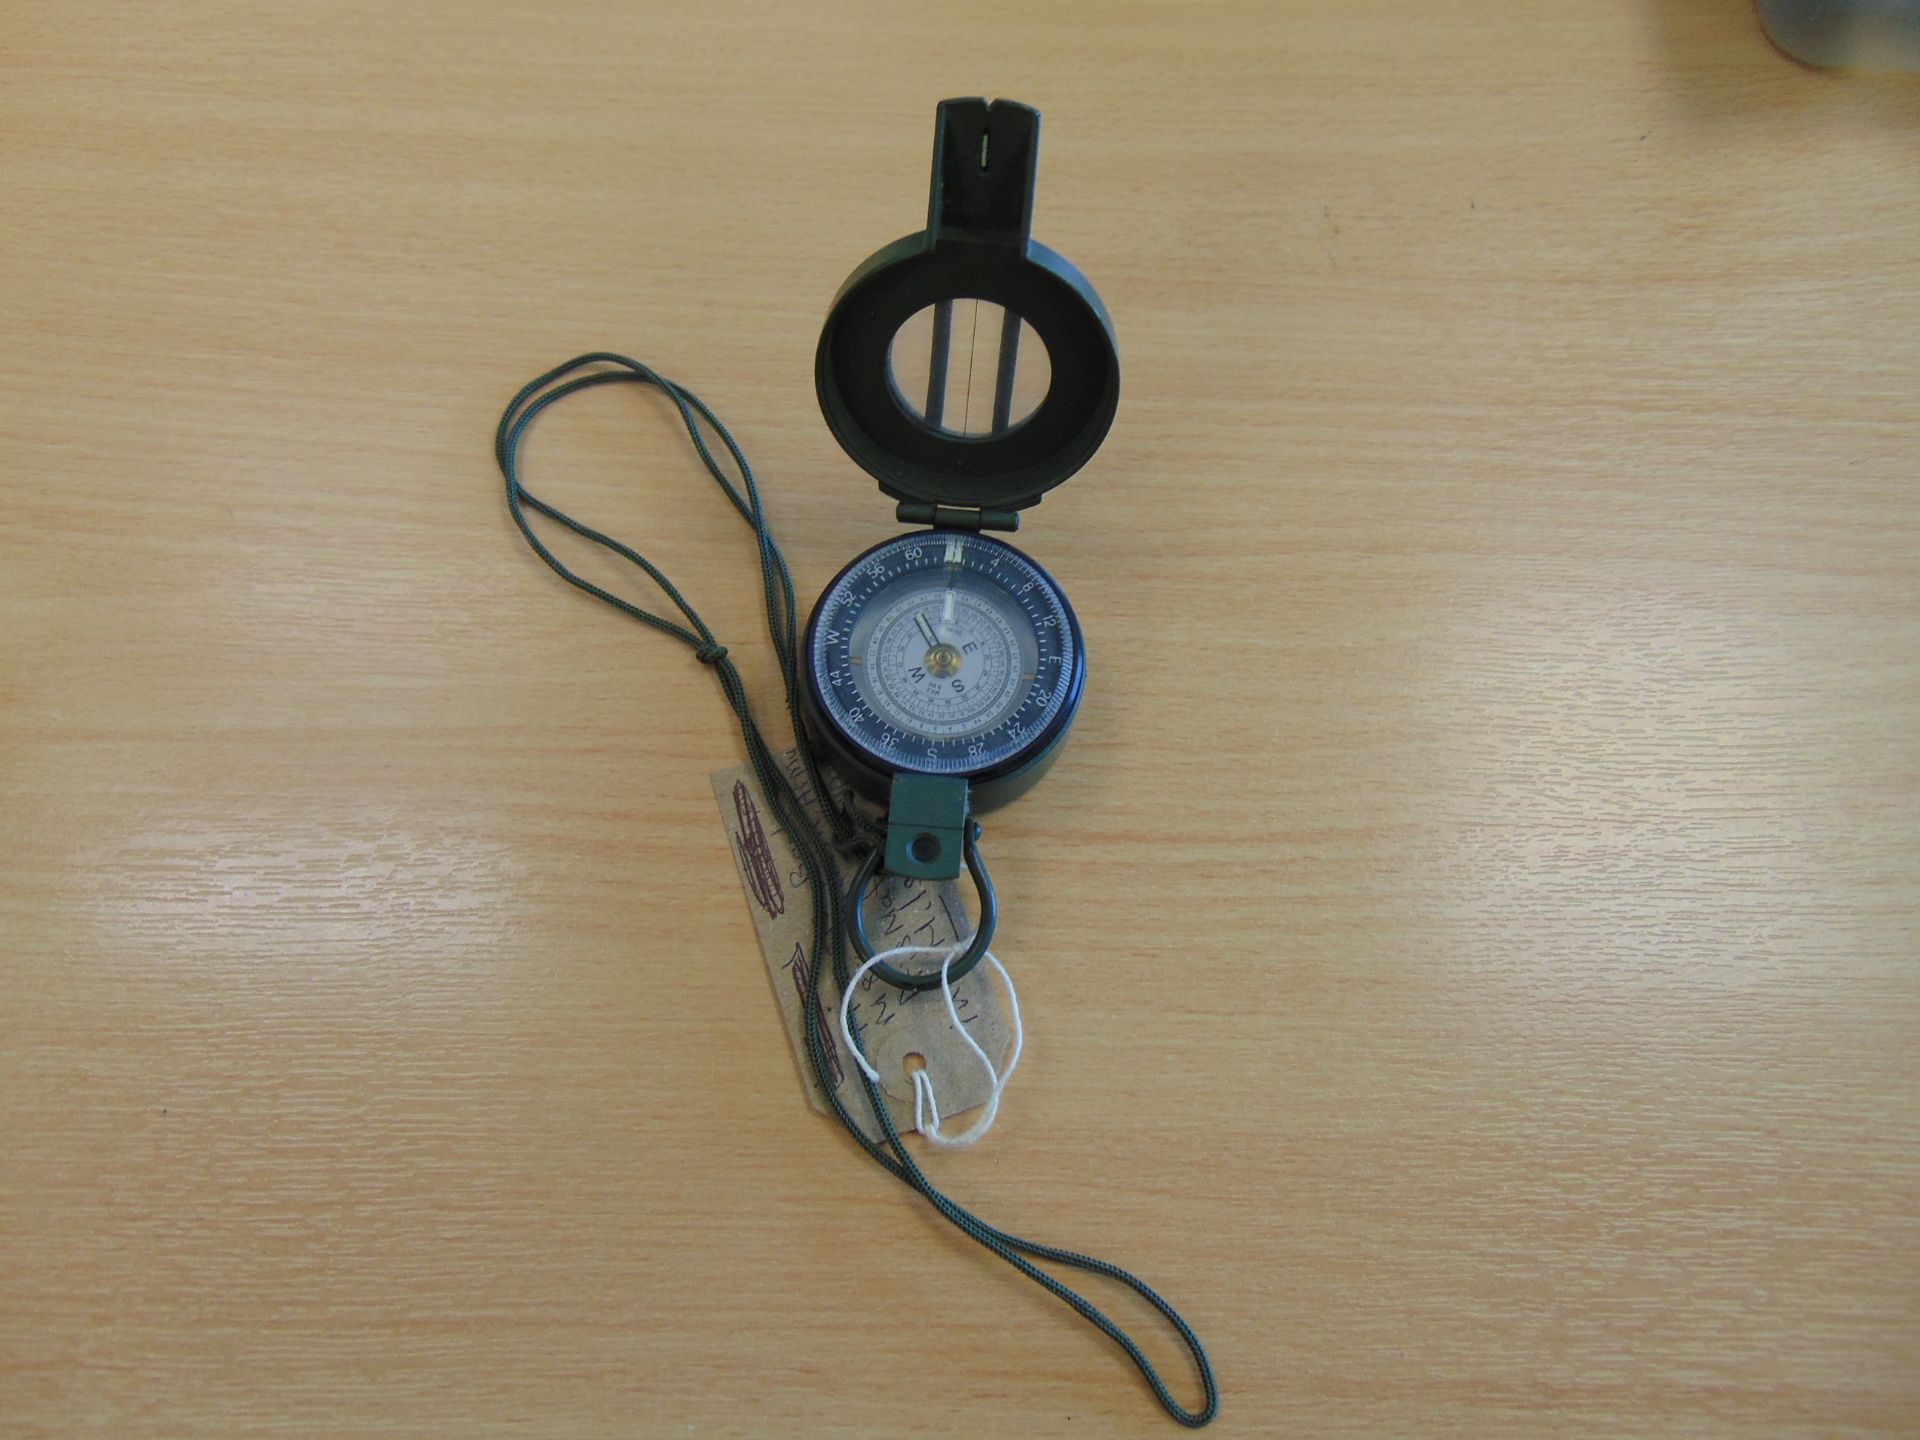 Francis Barker M88 British Army Prismatic Compass in Mils - Image 2 of 5